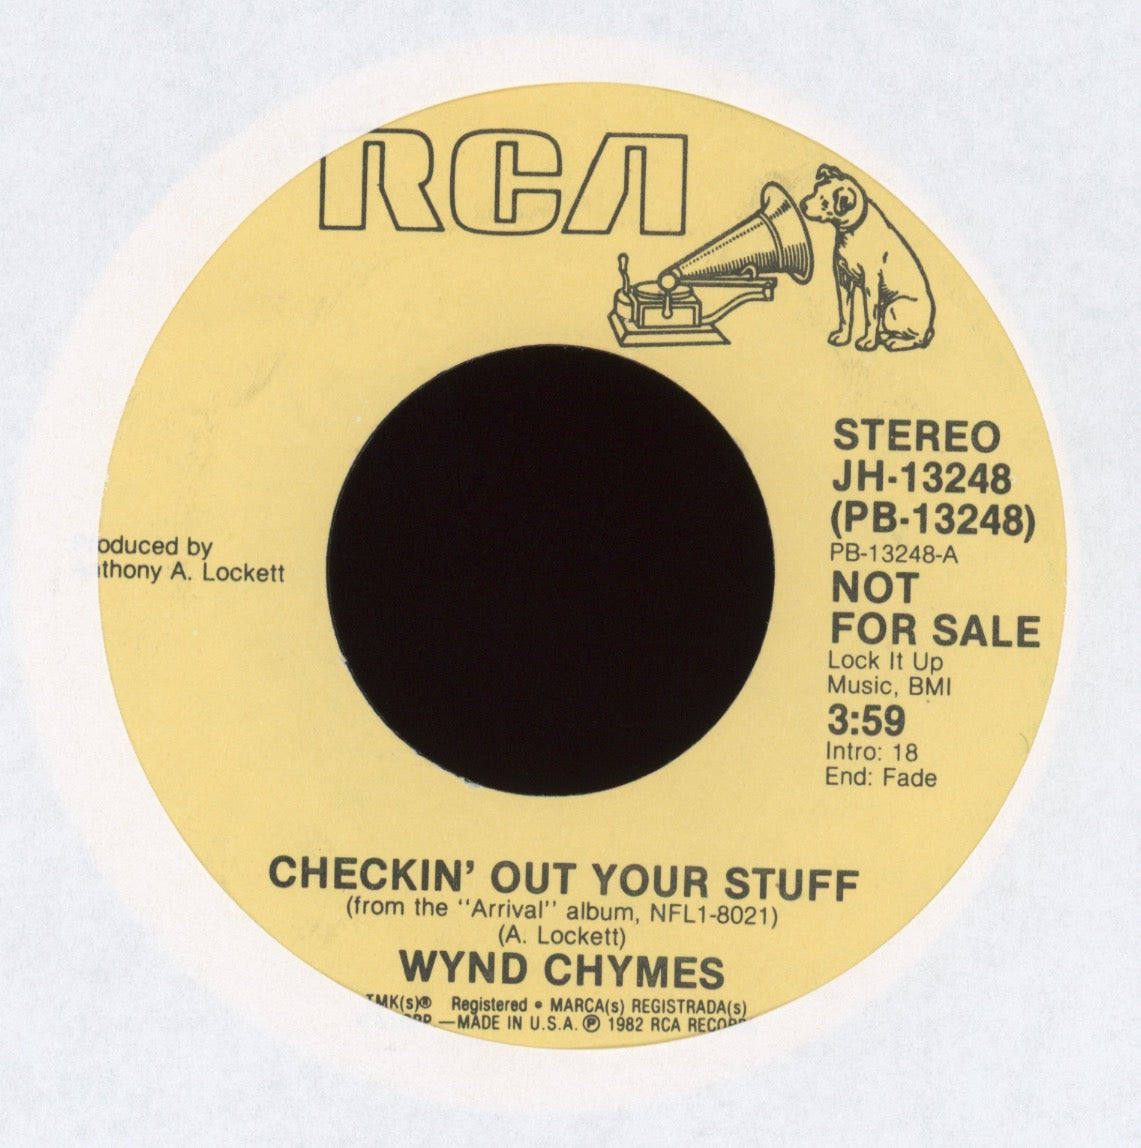 Wynd Chymes - Checkin' Out Your Stuff on RCA Promo